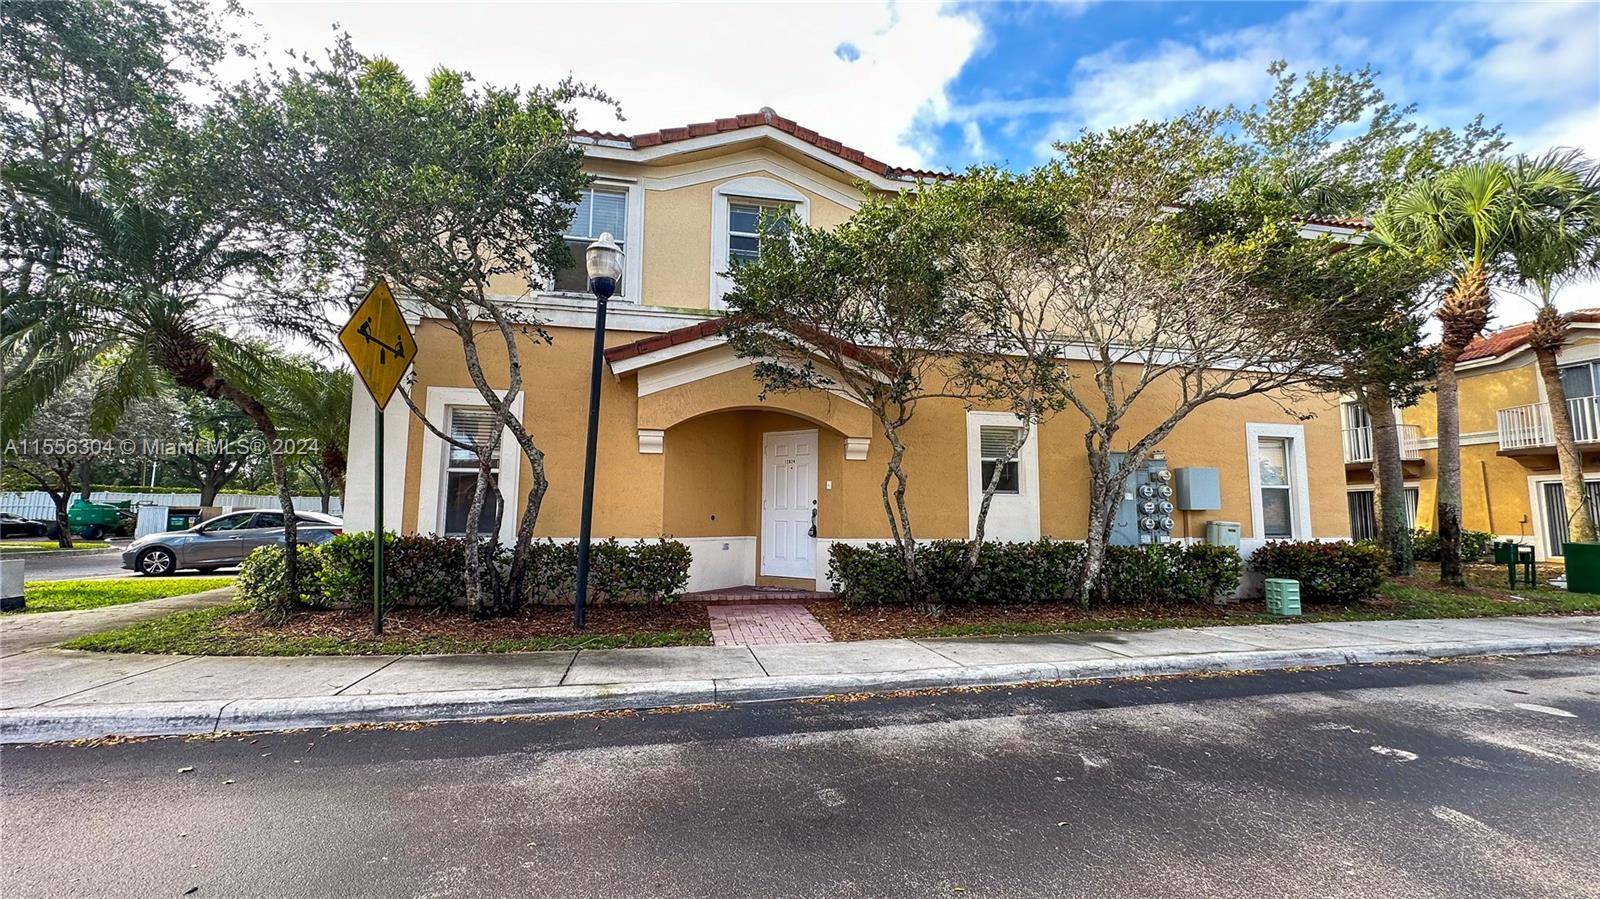 The luxurious 3 bedroom townhouse in Pembroke Pines offers a perfect blend of comfort, convenience, and style.